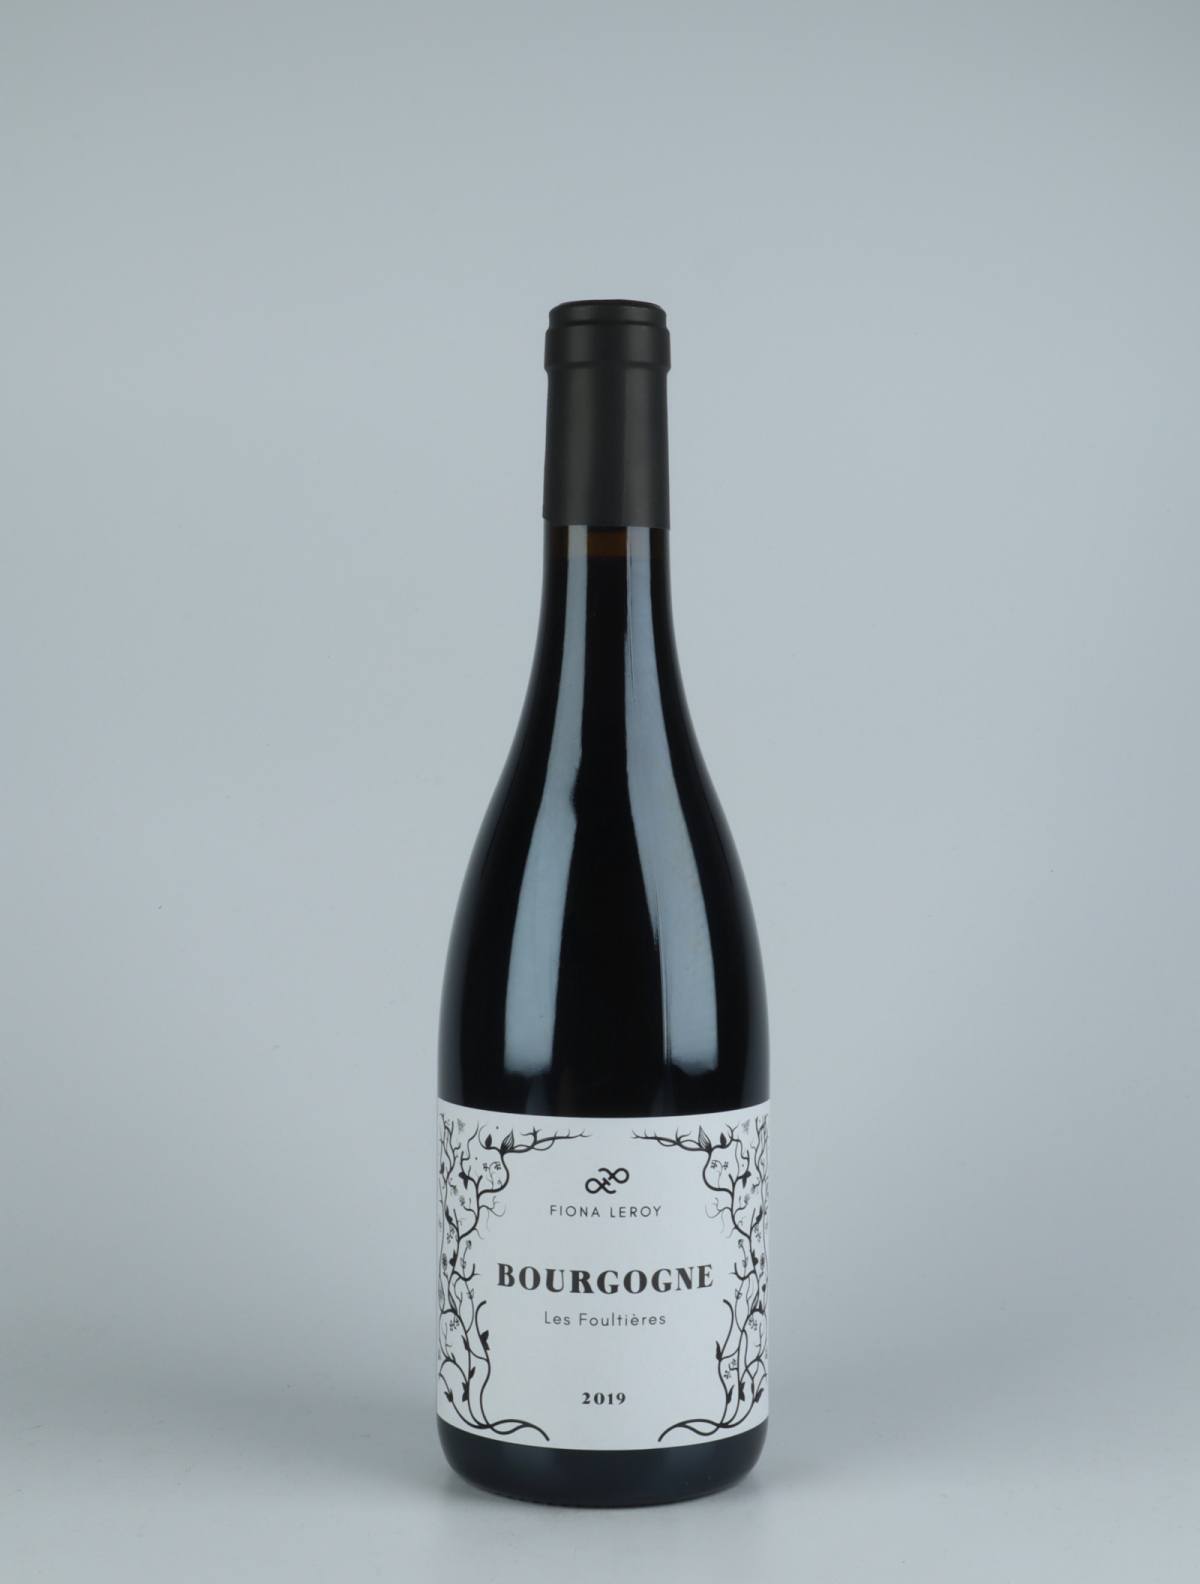 A bottle 2019 Bourgogne Rouge - Les Foultières Red wine from Fiona Leroy, Burgundy in France